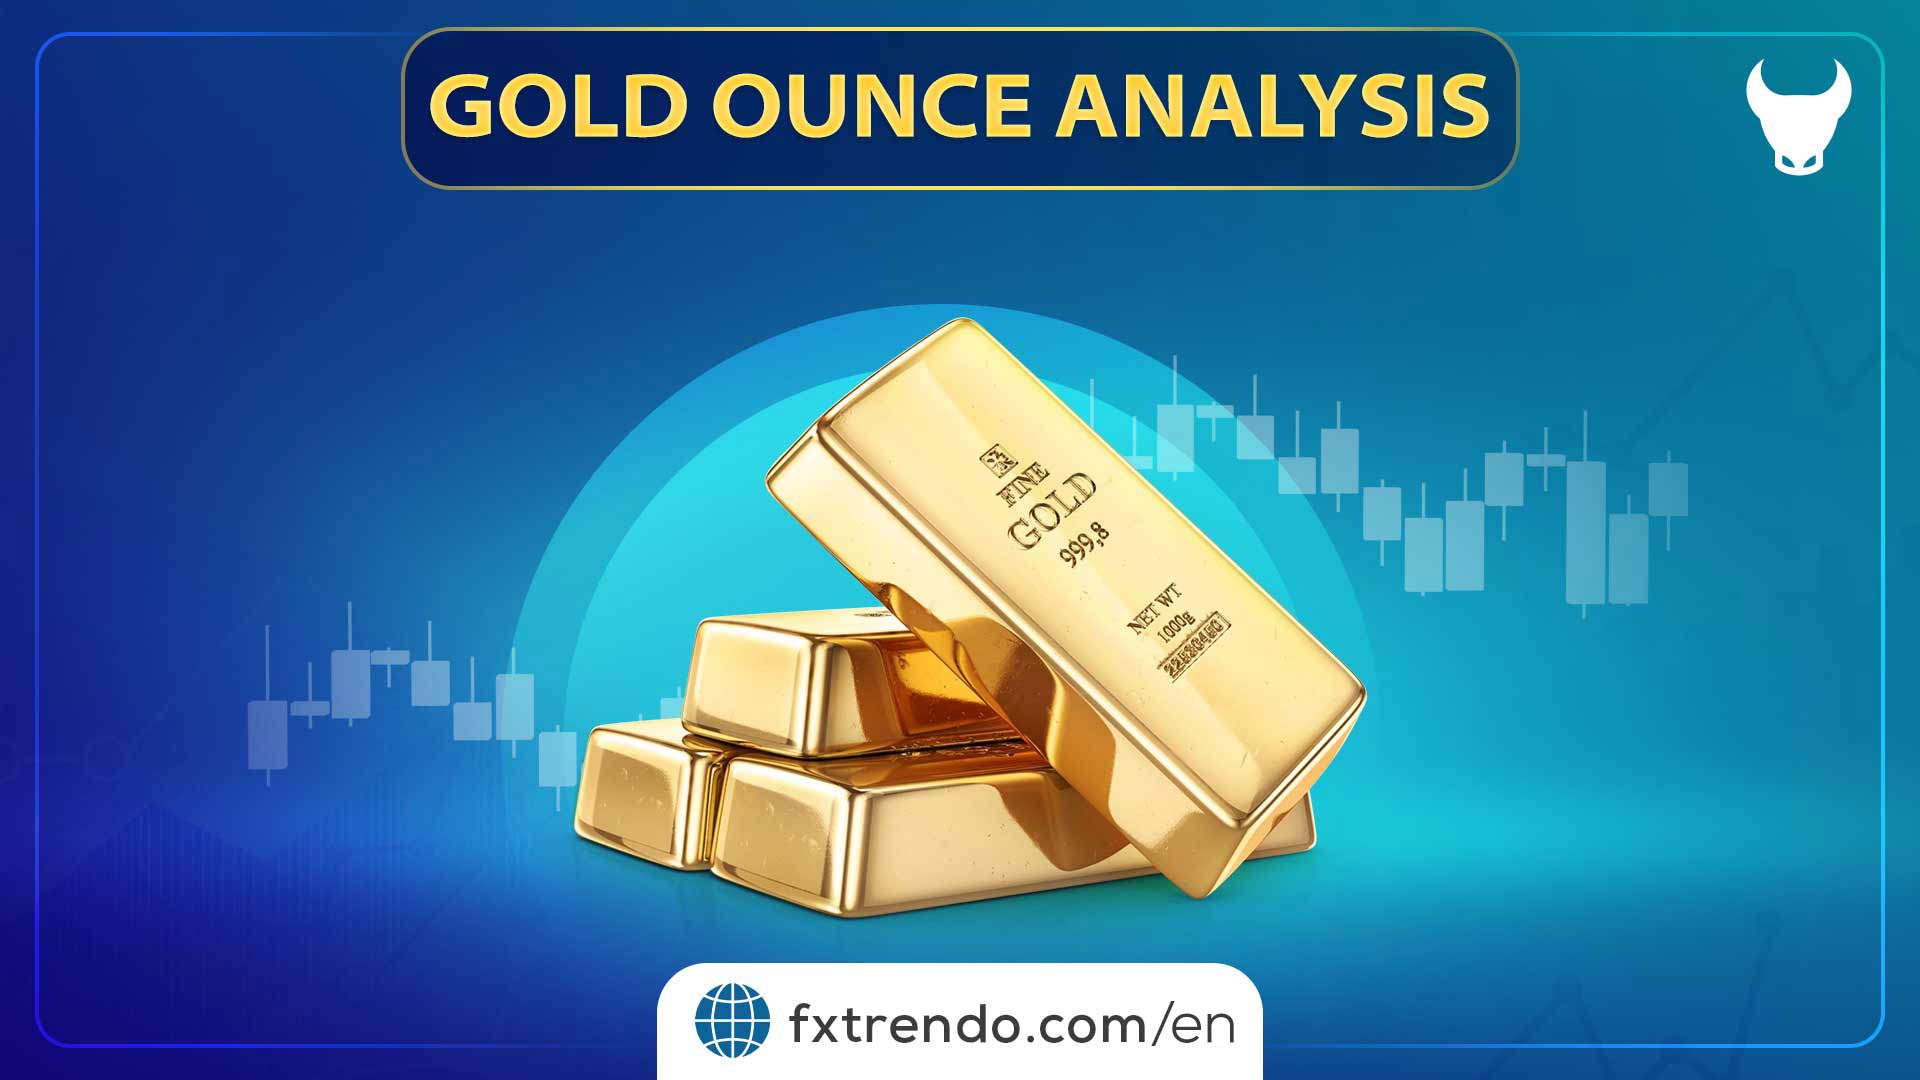 Gold ounce analysis